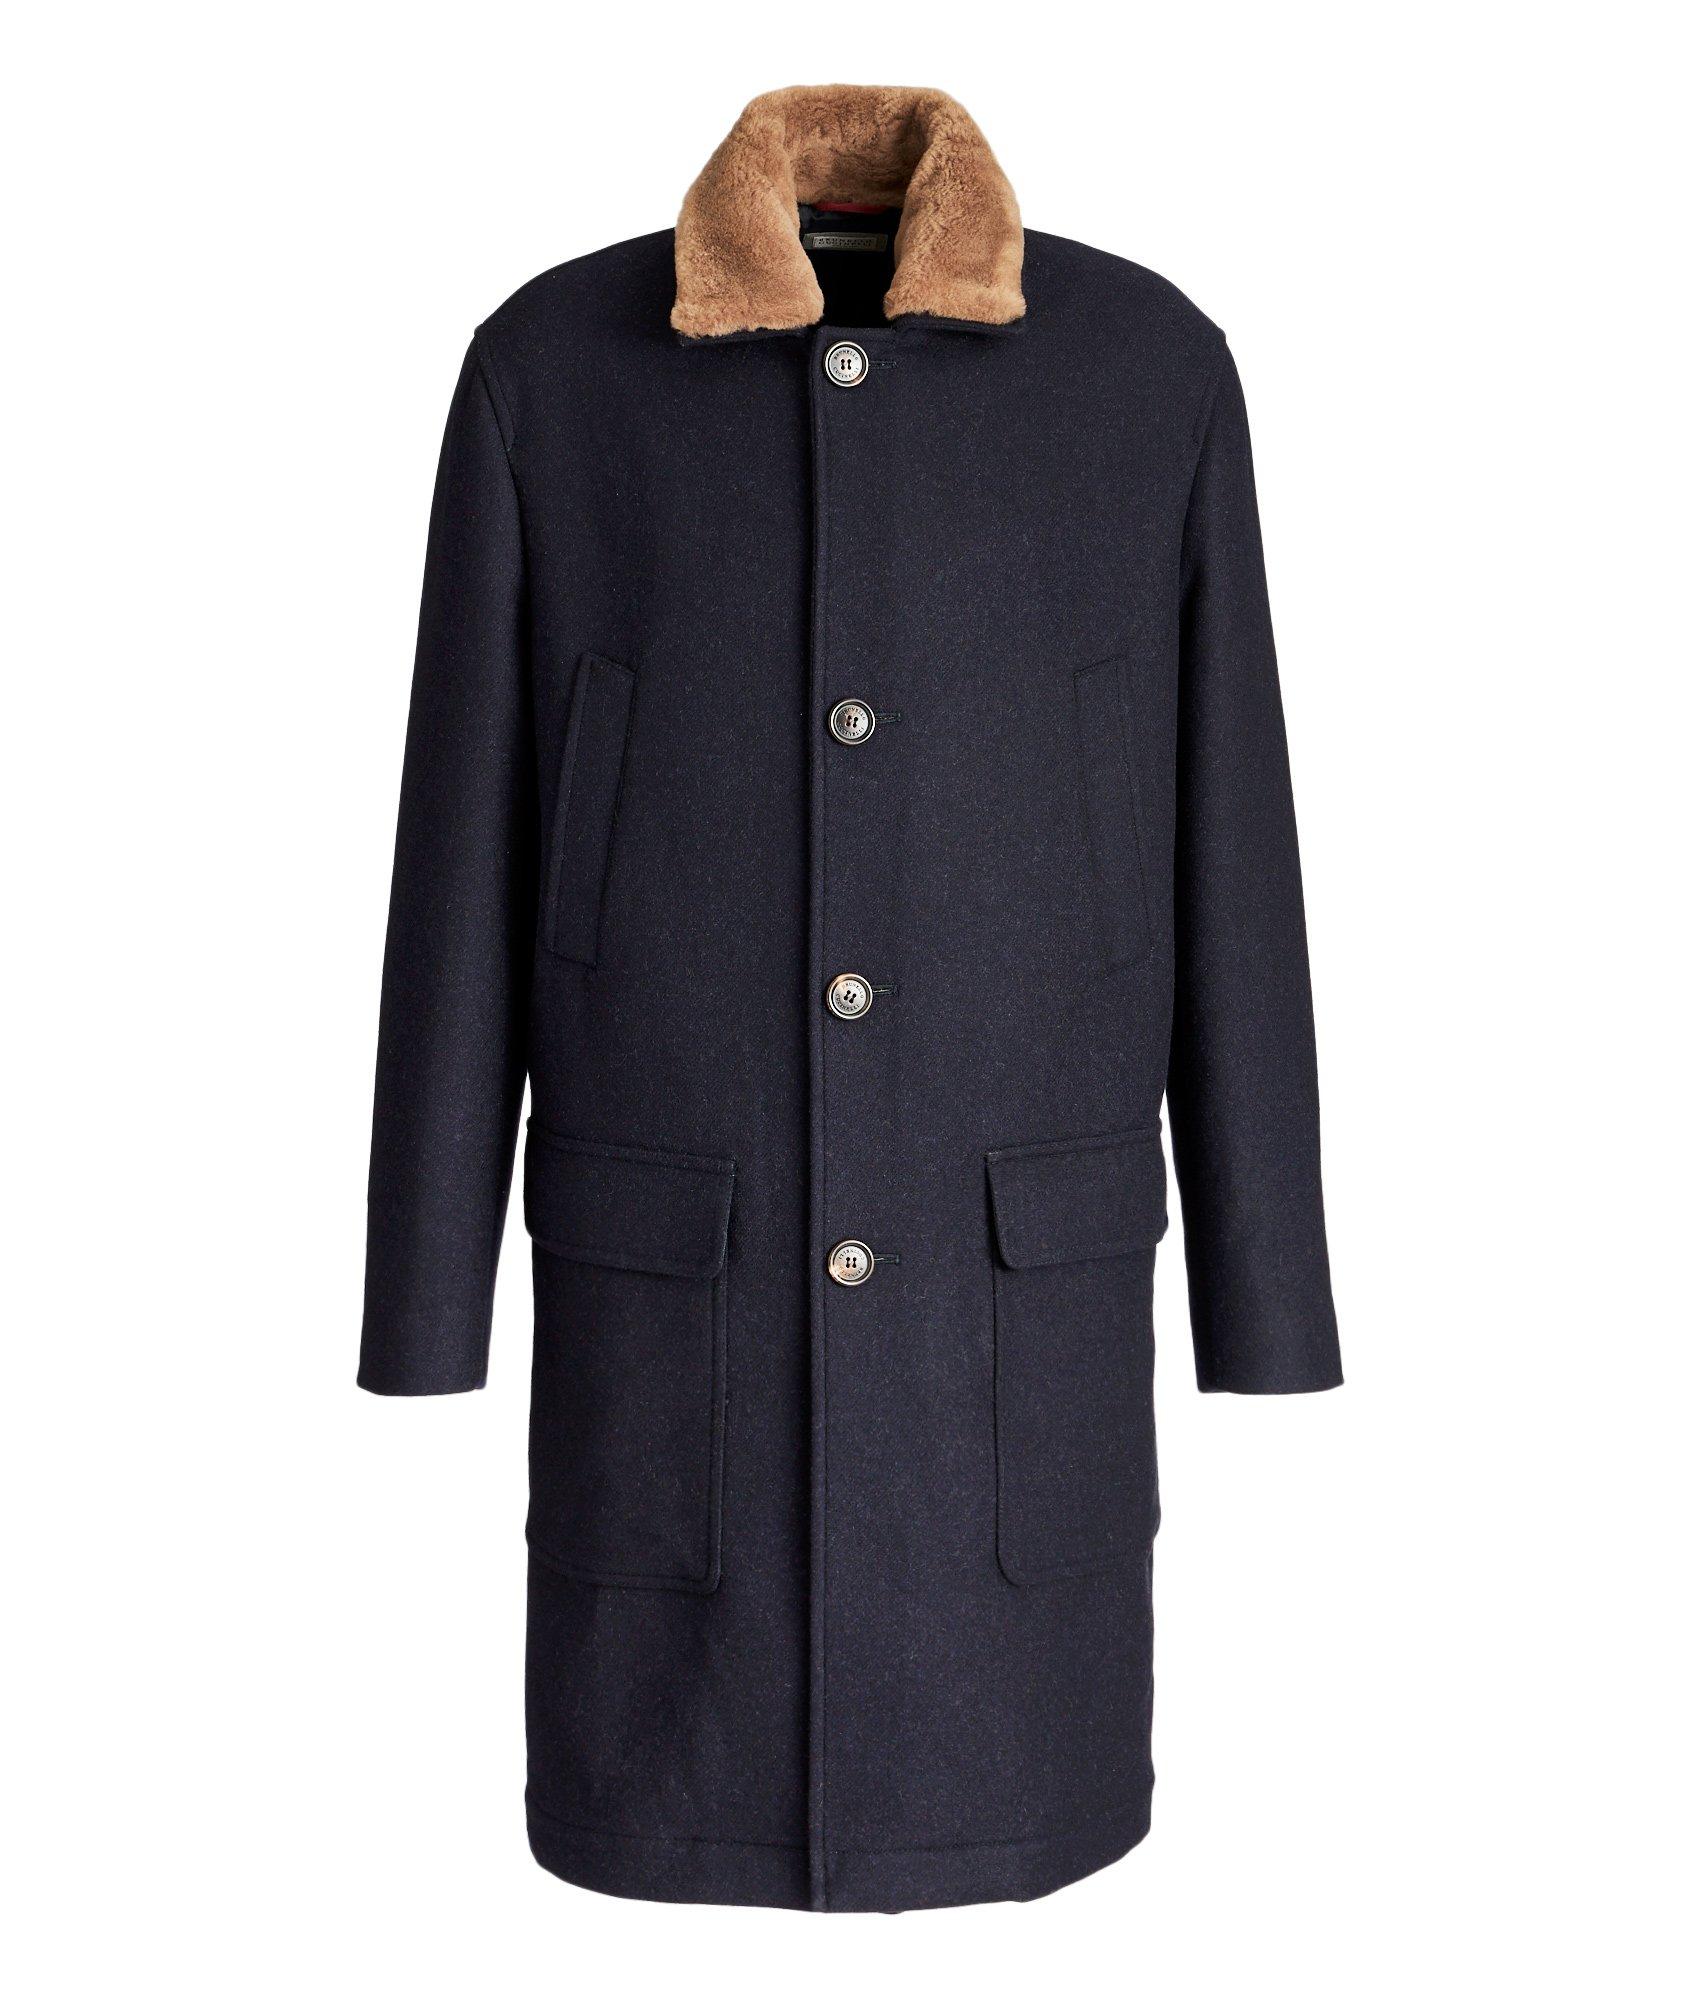 Shearling-Trimmed Overcoat image 0